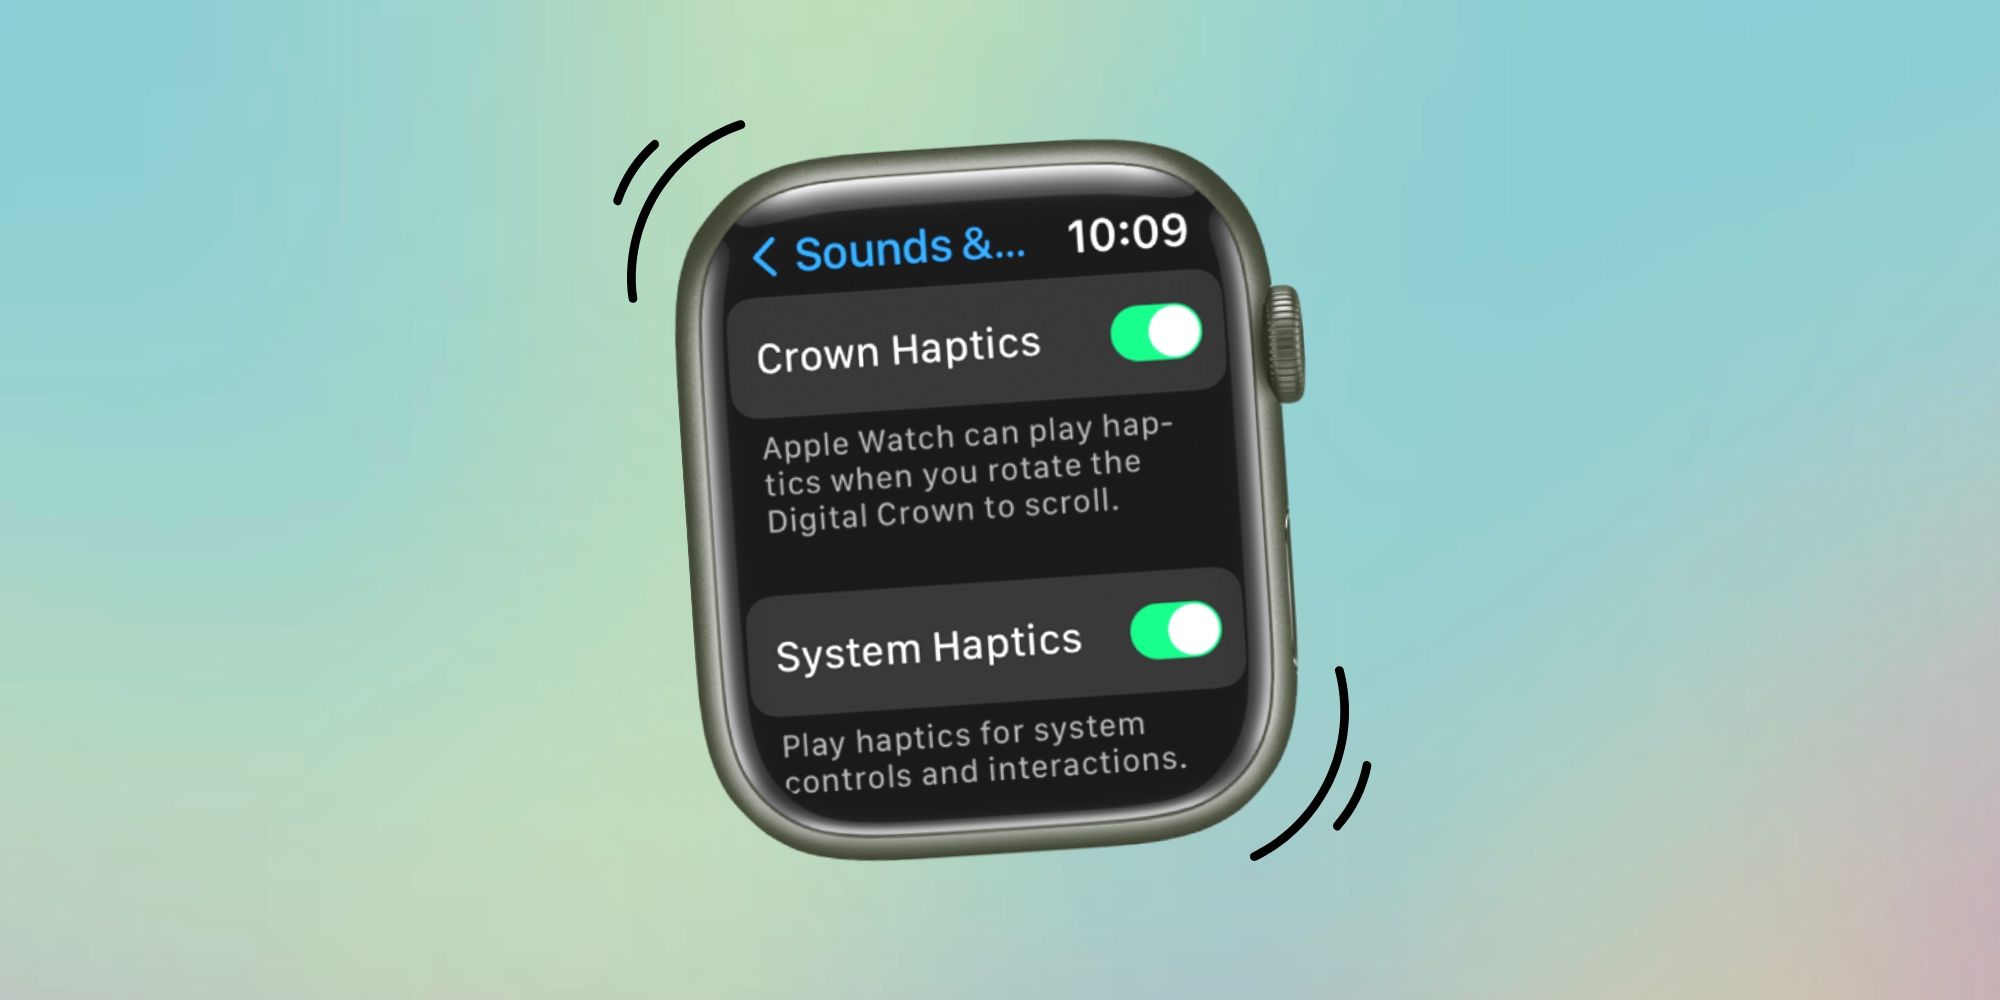 Image of Crown Haptics and System Haptics on Apple Watch over an abstract background